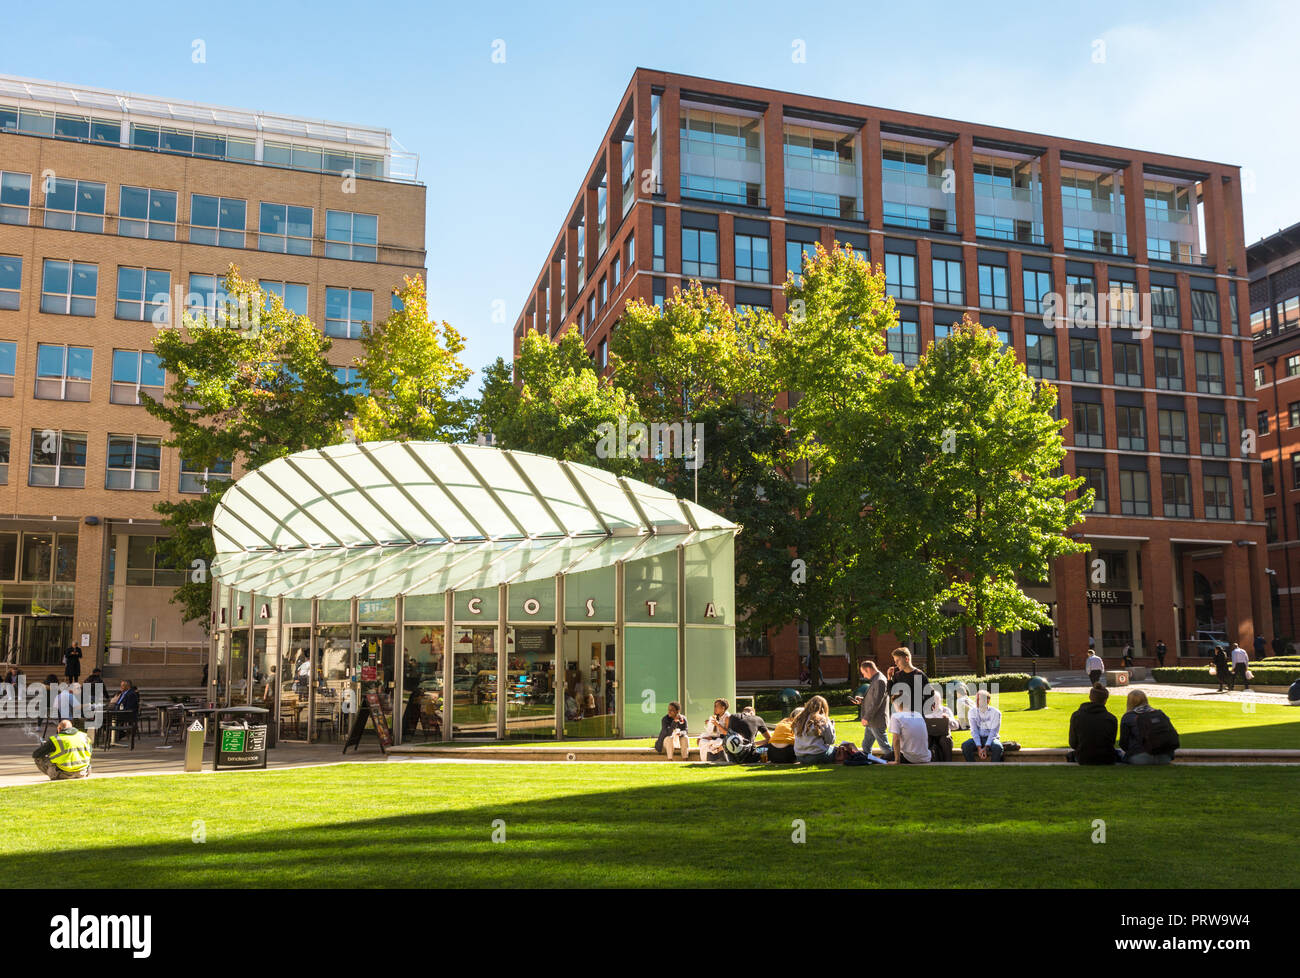 Central Square, Brindley Place, with people relaxing in late summer sunshine and warmth, Birmingham UK Stock Photo